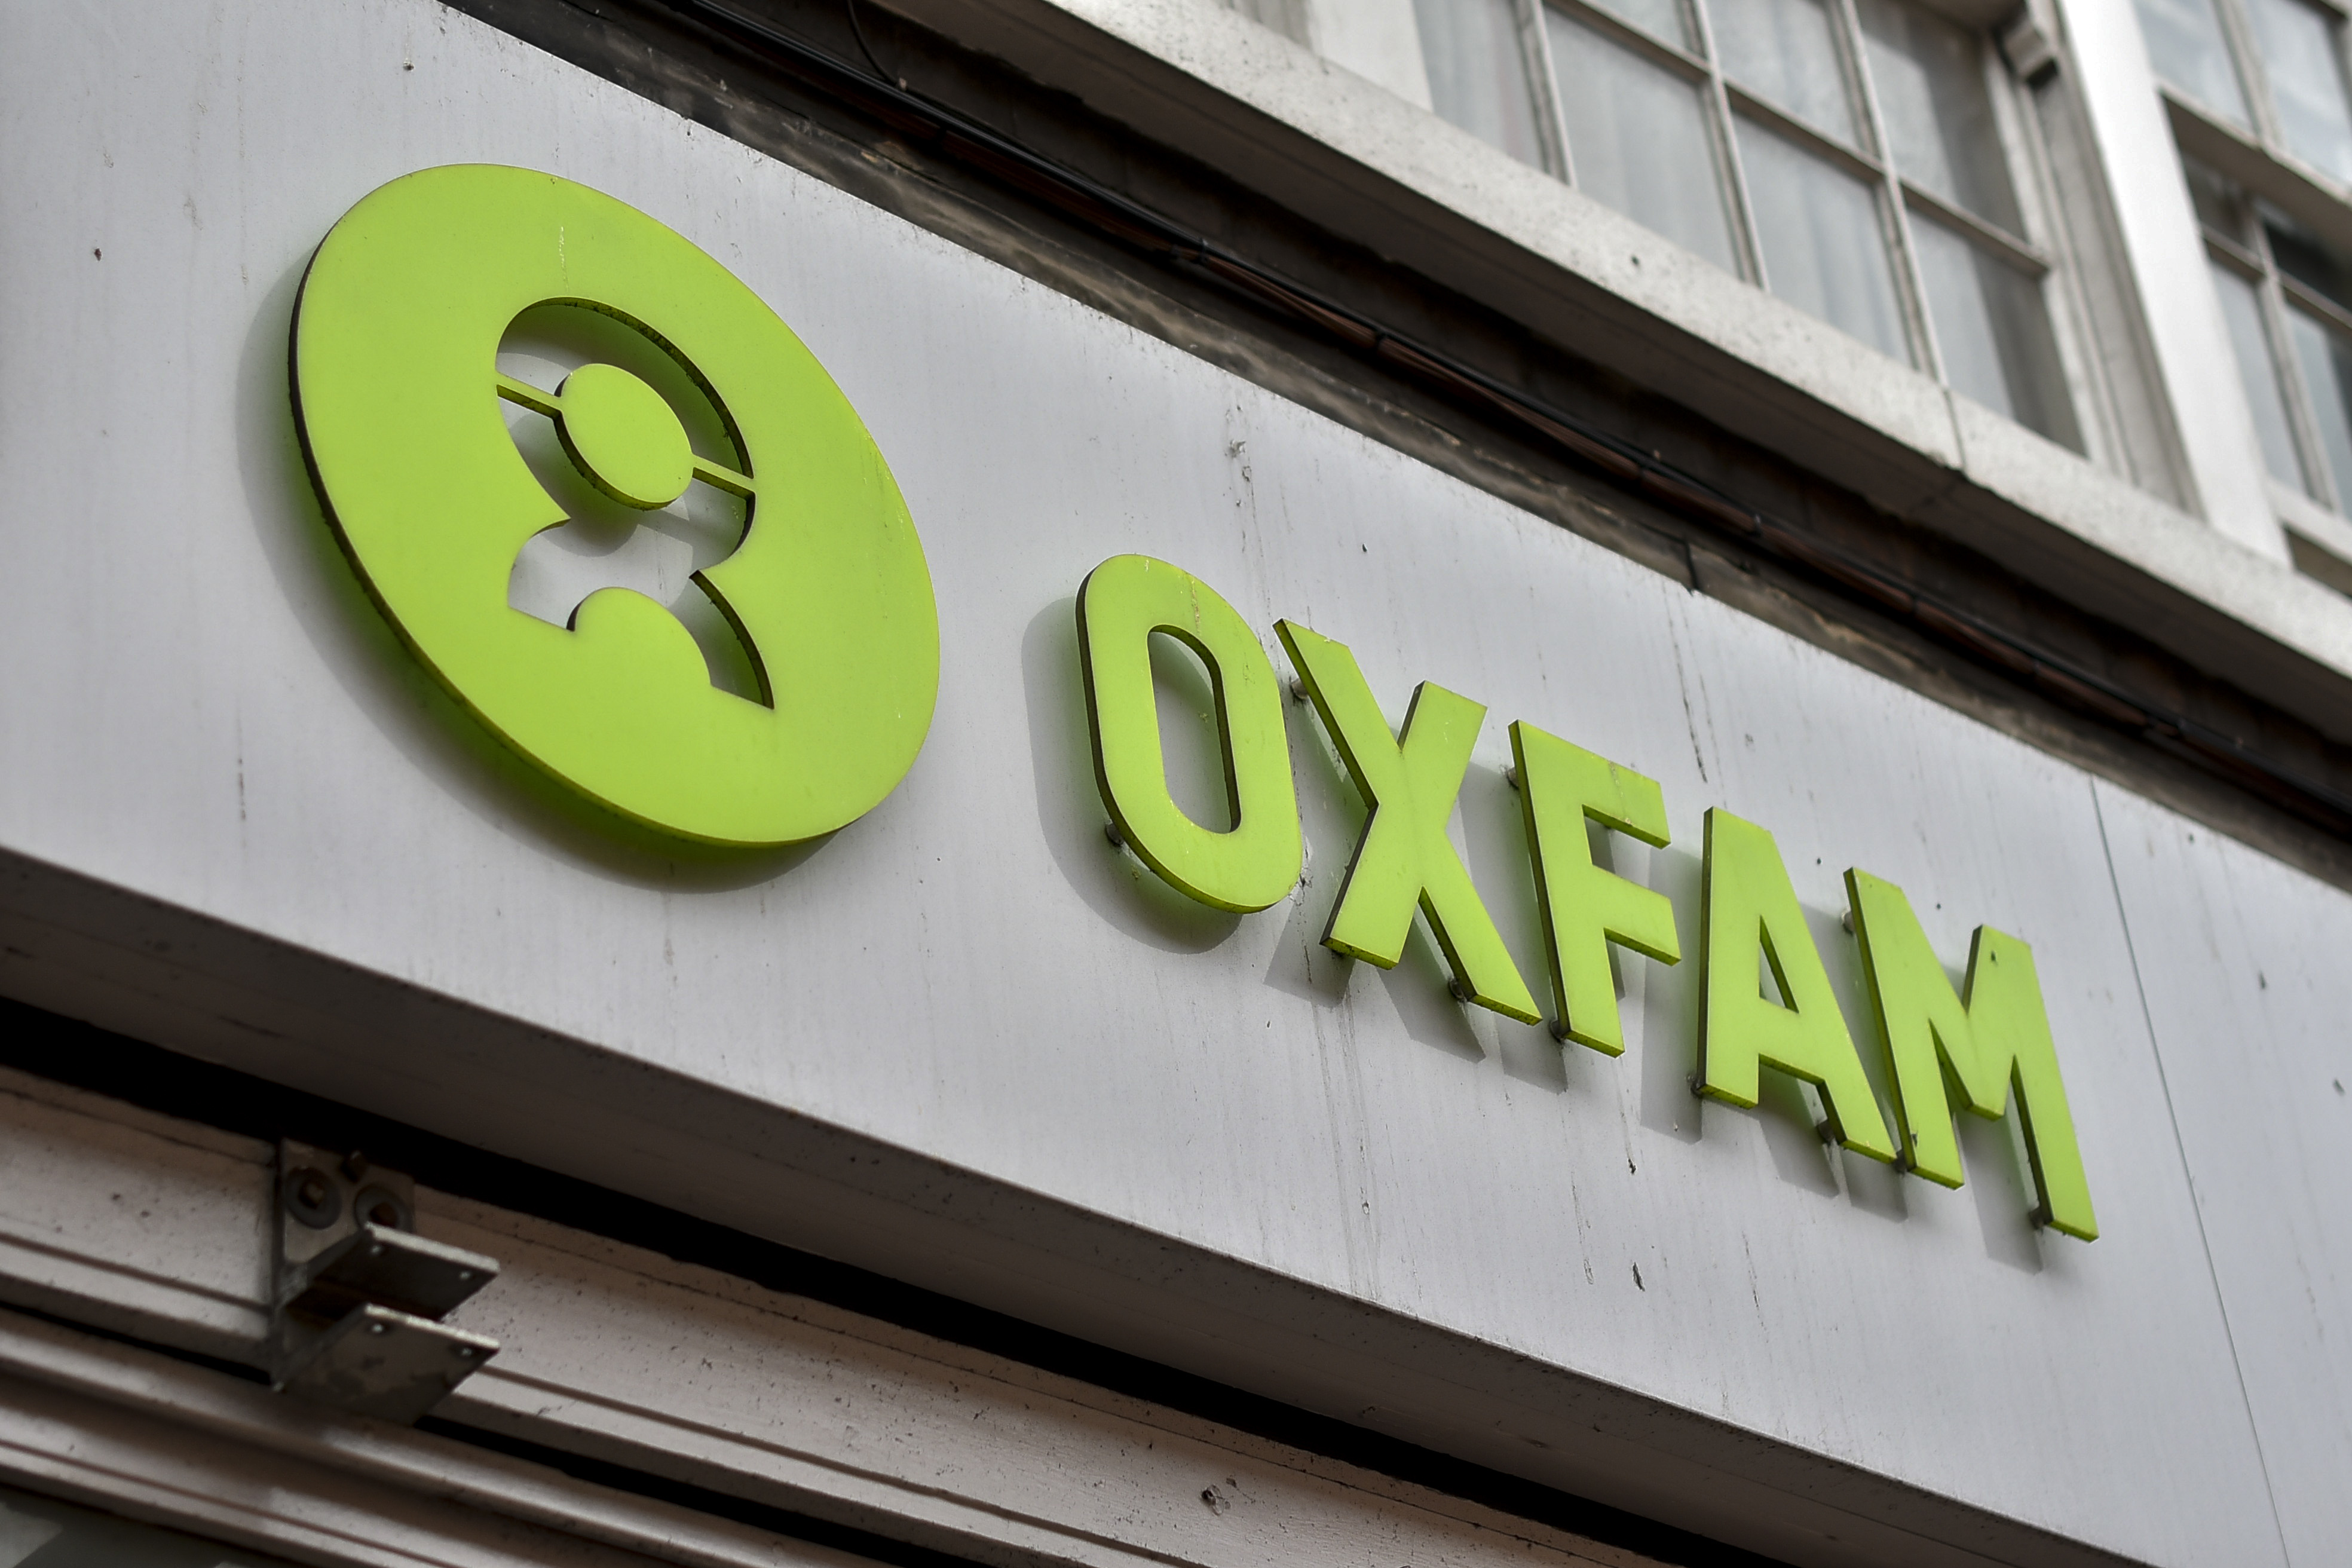 Oxfam aid workers threatened colleague over sex scandal investigation